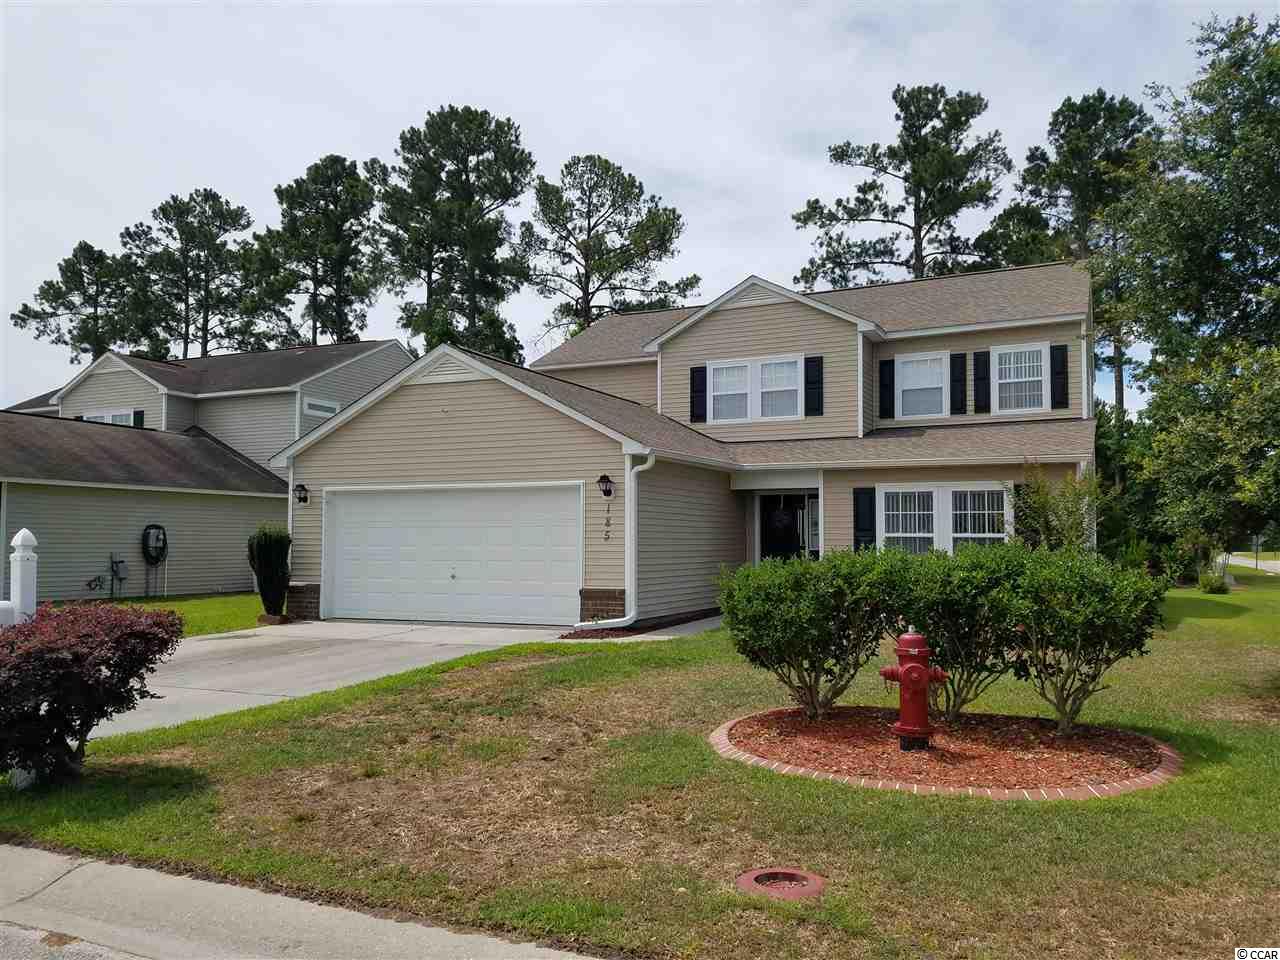 185 Weeping Willow Dr. Myrtle Beach, SC 29579